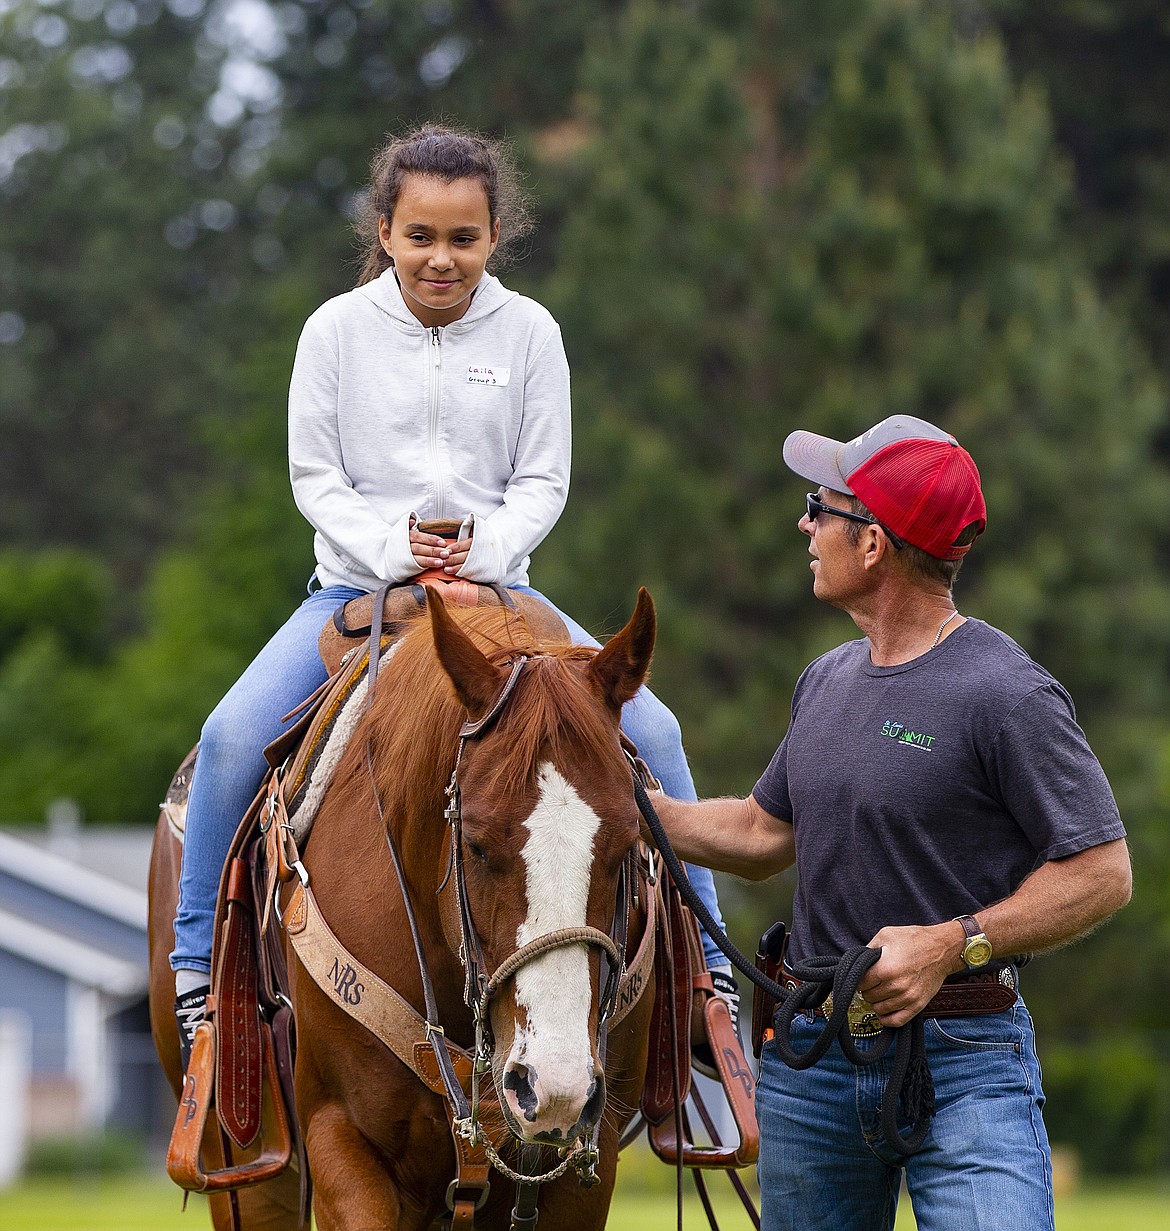 Dave Paul assists fourth-grader Laila Jones as she rides Red during the Pat Triphahn Memorial Idaho History Rendezvous Day at Ponderosa Elementary School in Post Falls on Thursday.